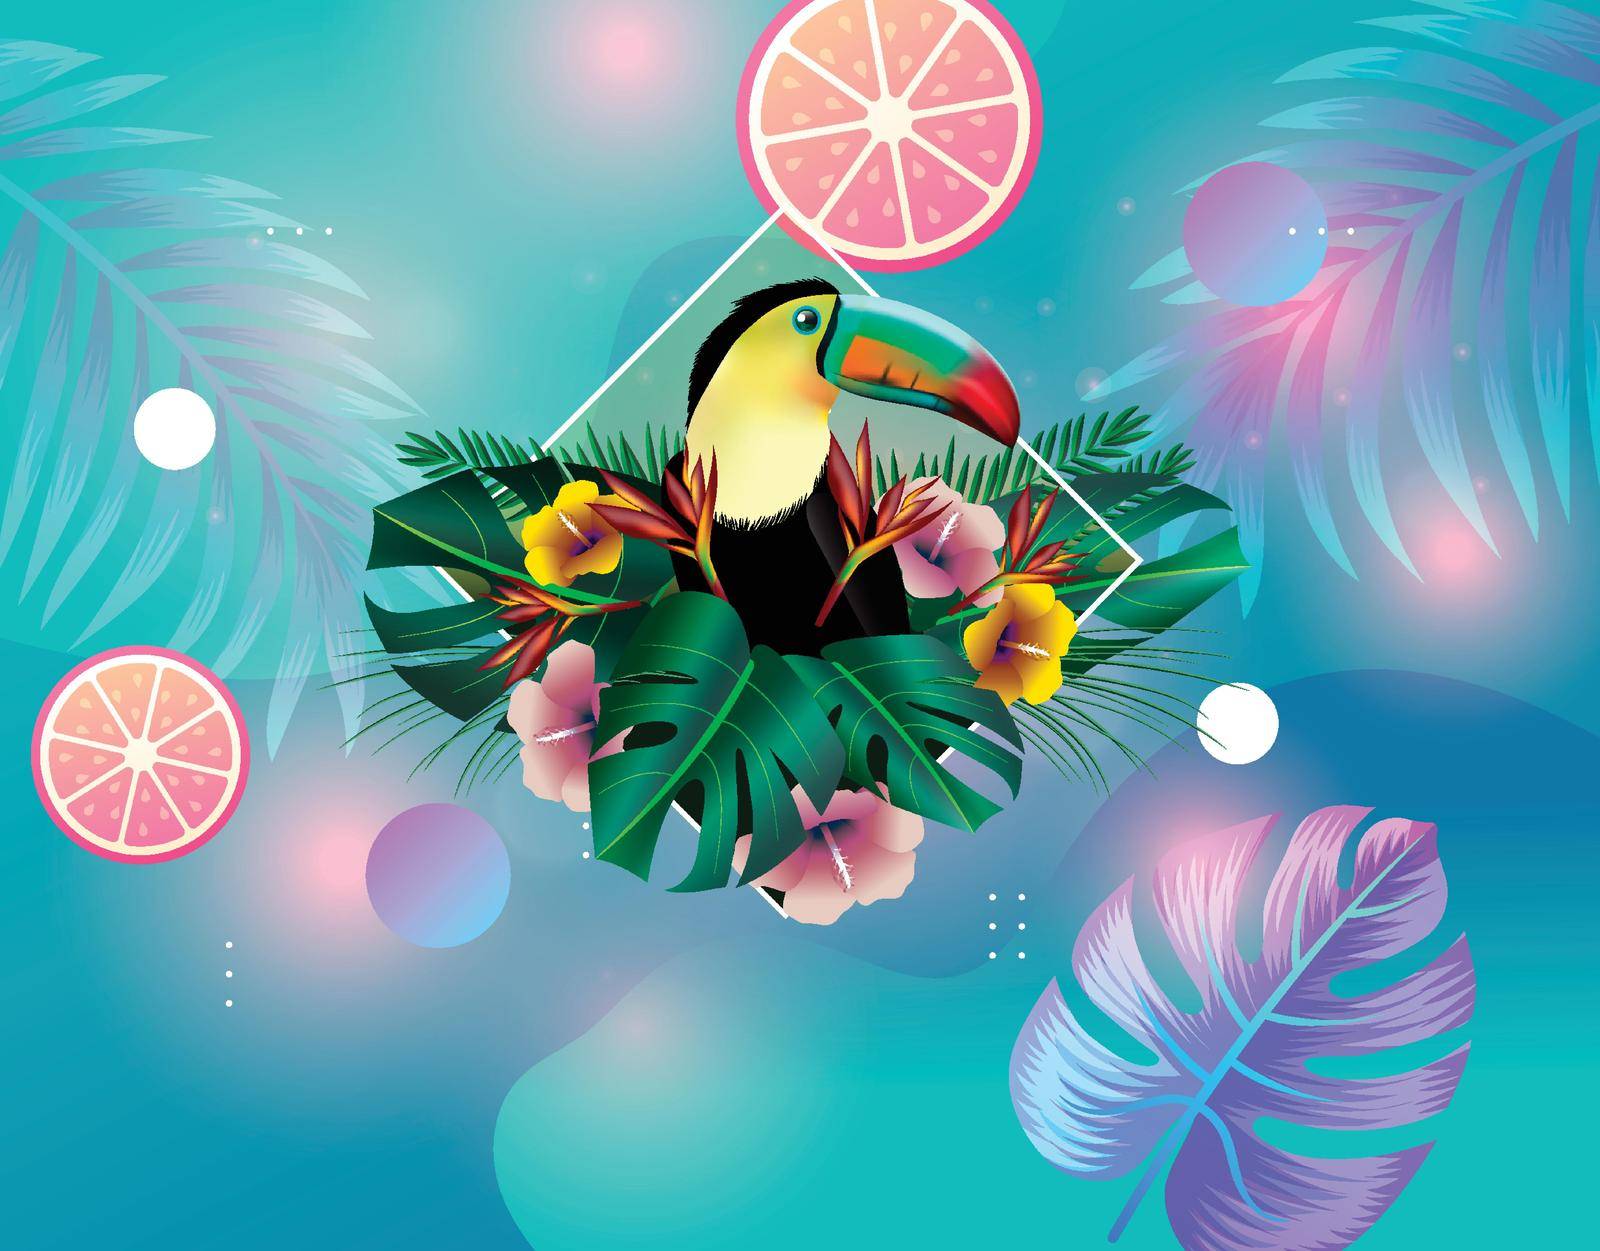 you can use colorful tropical background with realistic design to design banners, posters, backgrounds, ...etc.